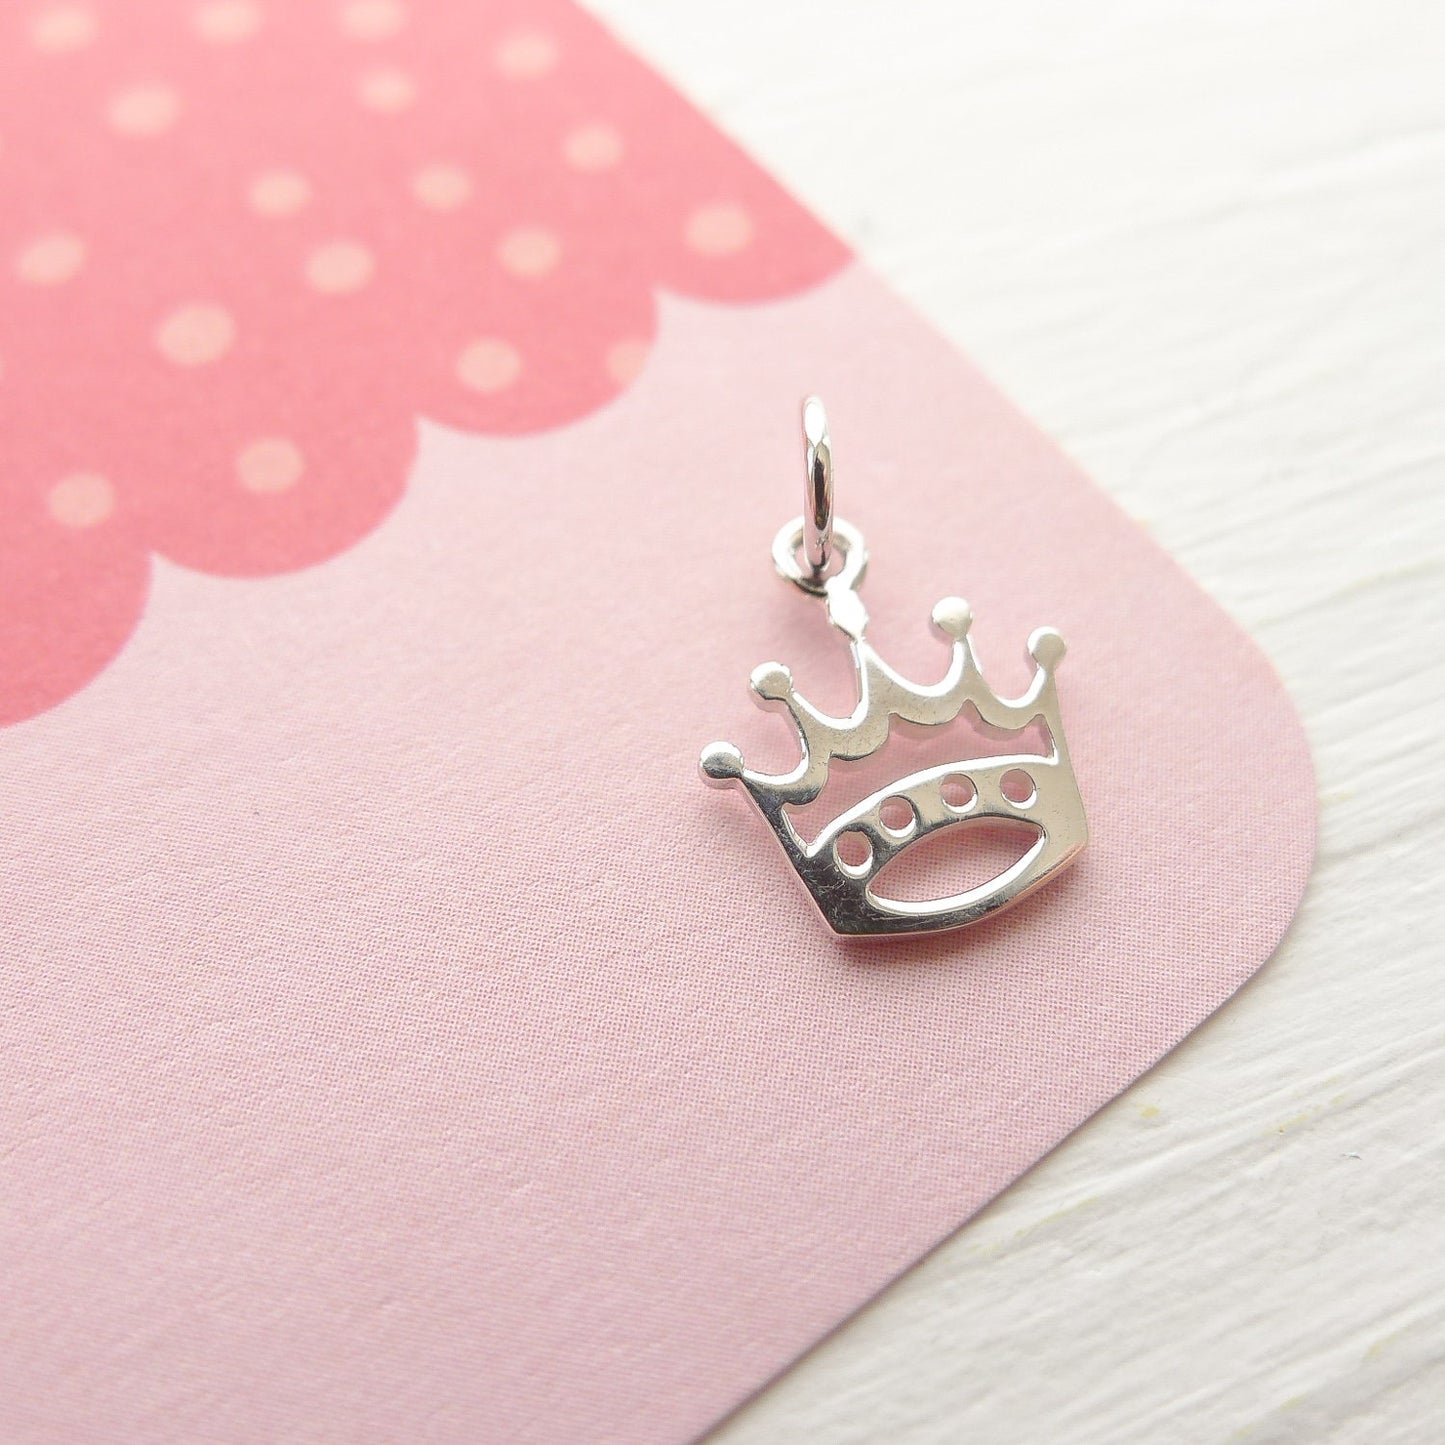 Crown Charm Sterling Silver Princess Queen King Price Jewelry Pendant